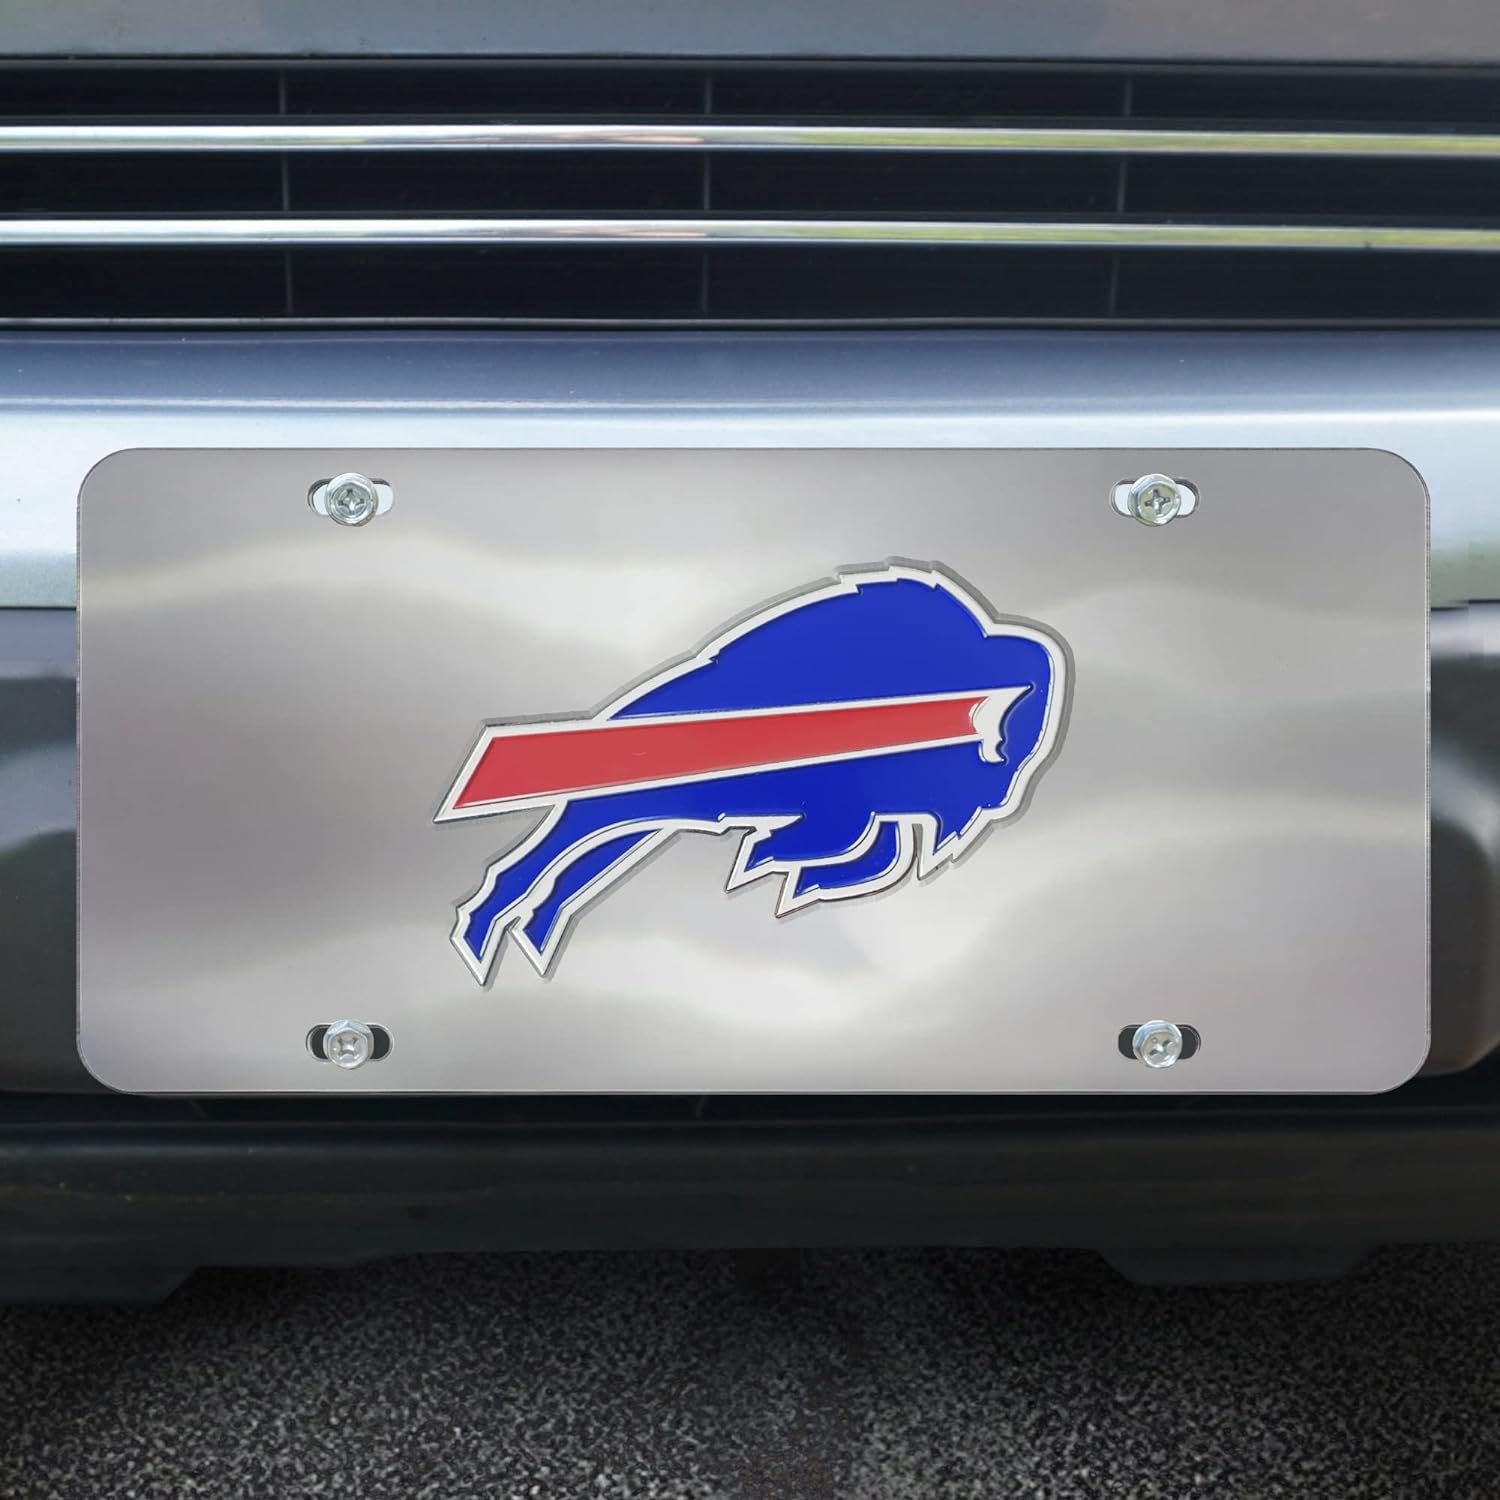 Buffalo Bills License Plate Tag, Premium Stainless Steel Diecast, Chrome, Raised Solid Metal Color Emblem, 6x12 Inch